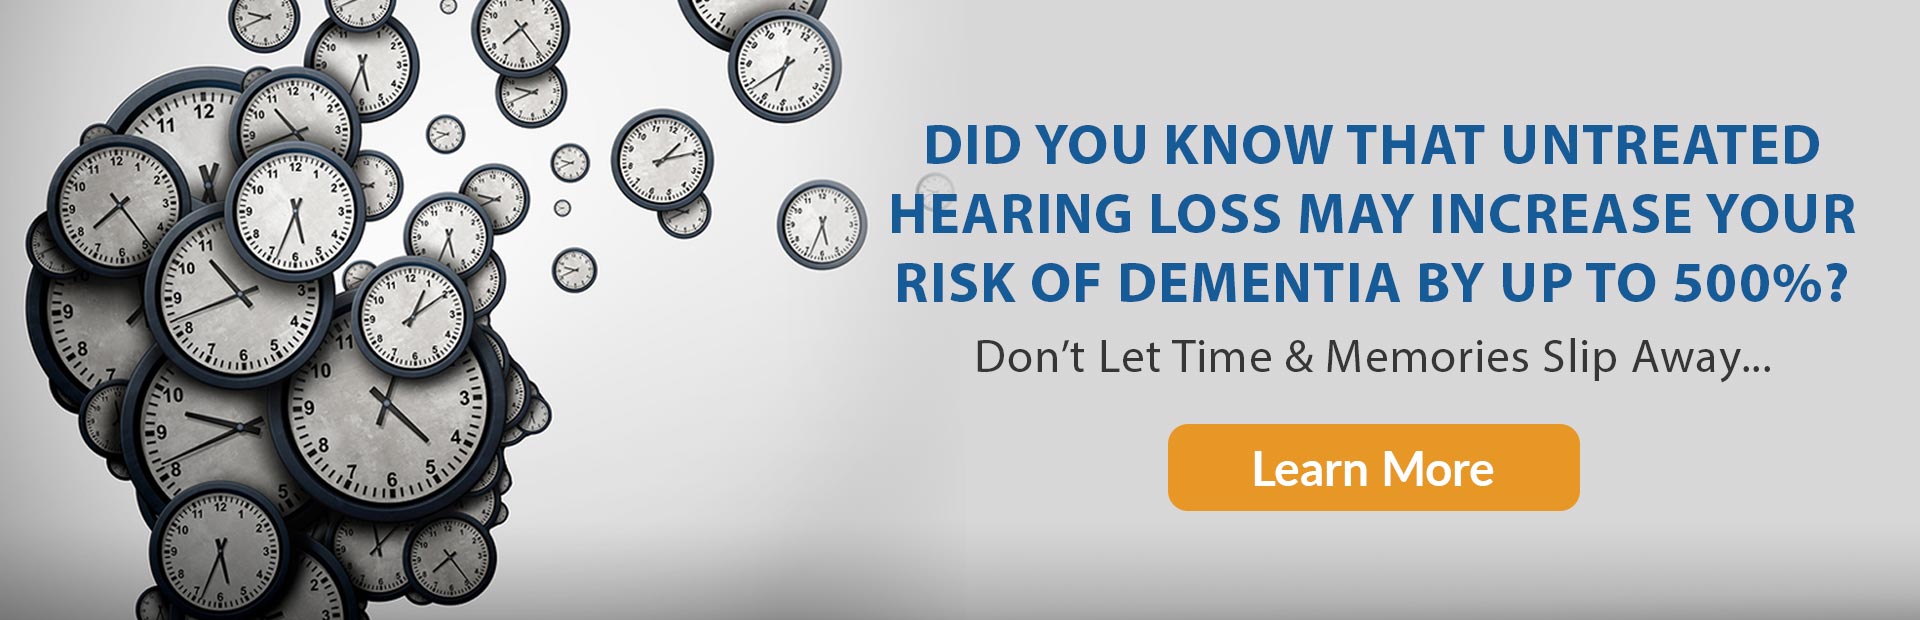 learn more hearing loss and dementia